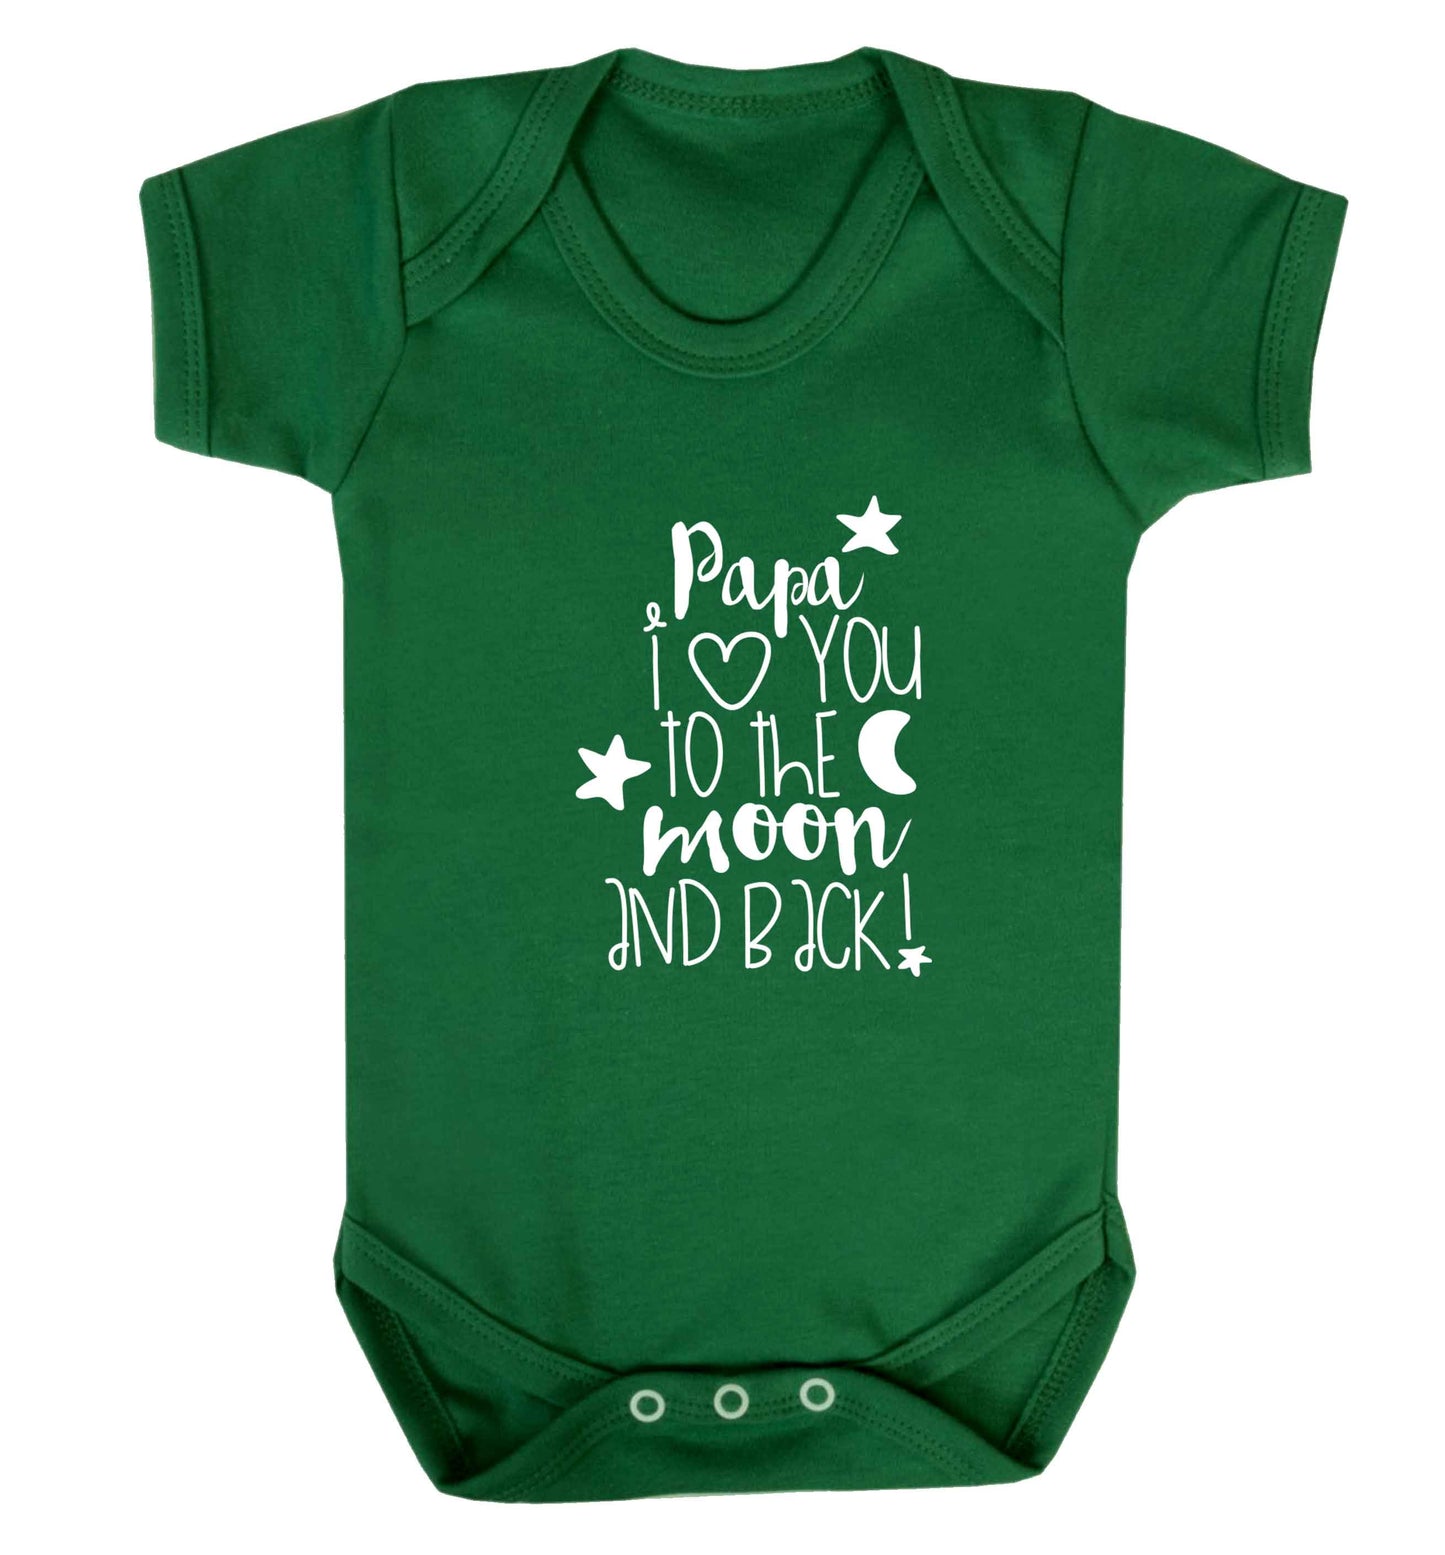 Papa I love you to the moon and back baby vest green 18-24 months